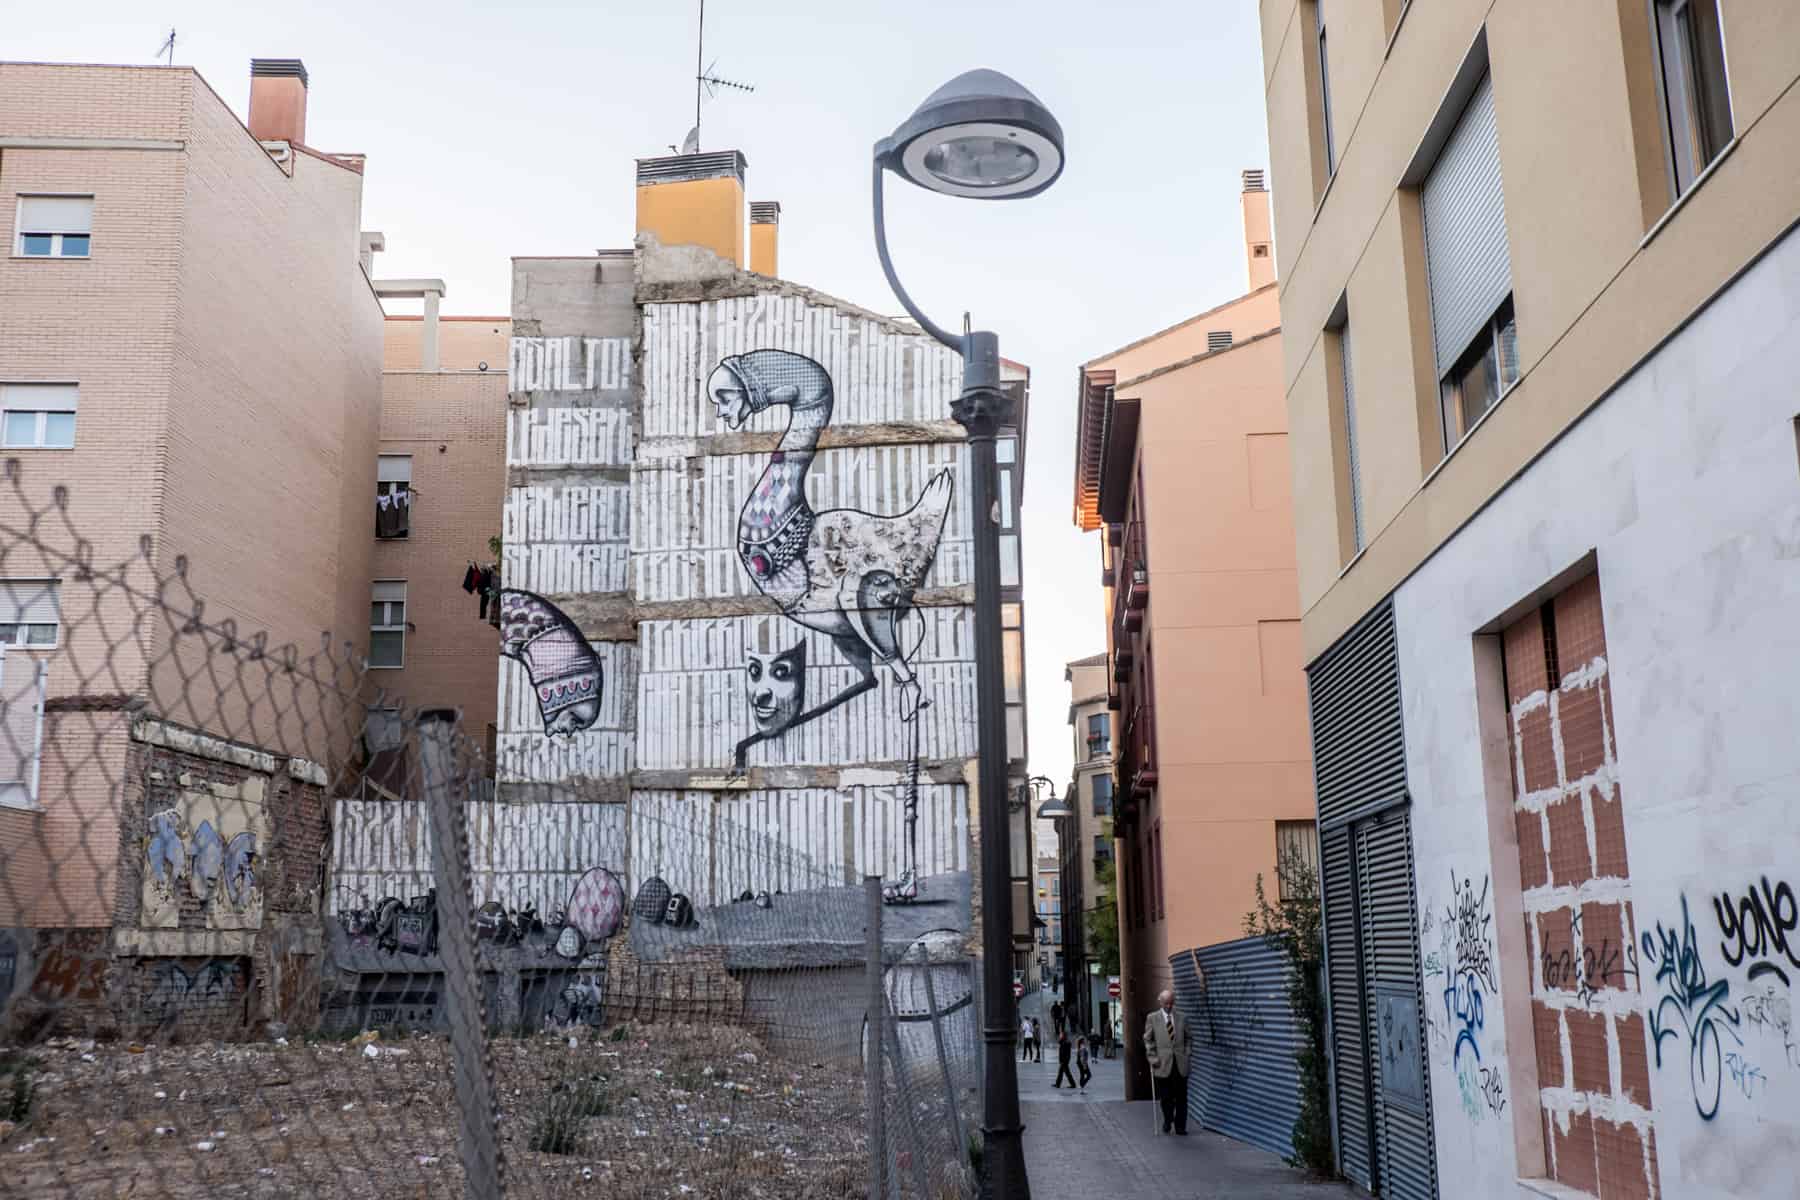 A crumbling building next to a yard of rubble is covered is lines of white paint and a bird-like mural - bringing life to a run down street in local Zaragoza.